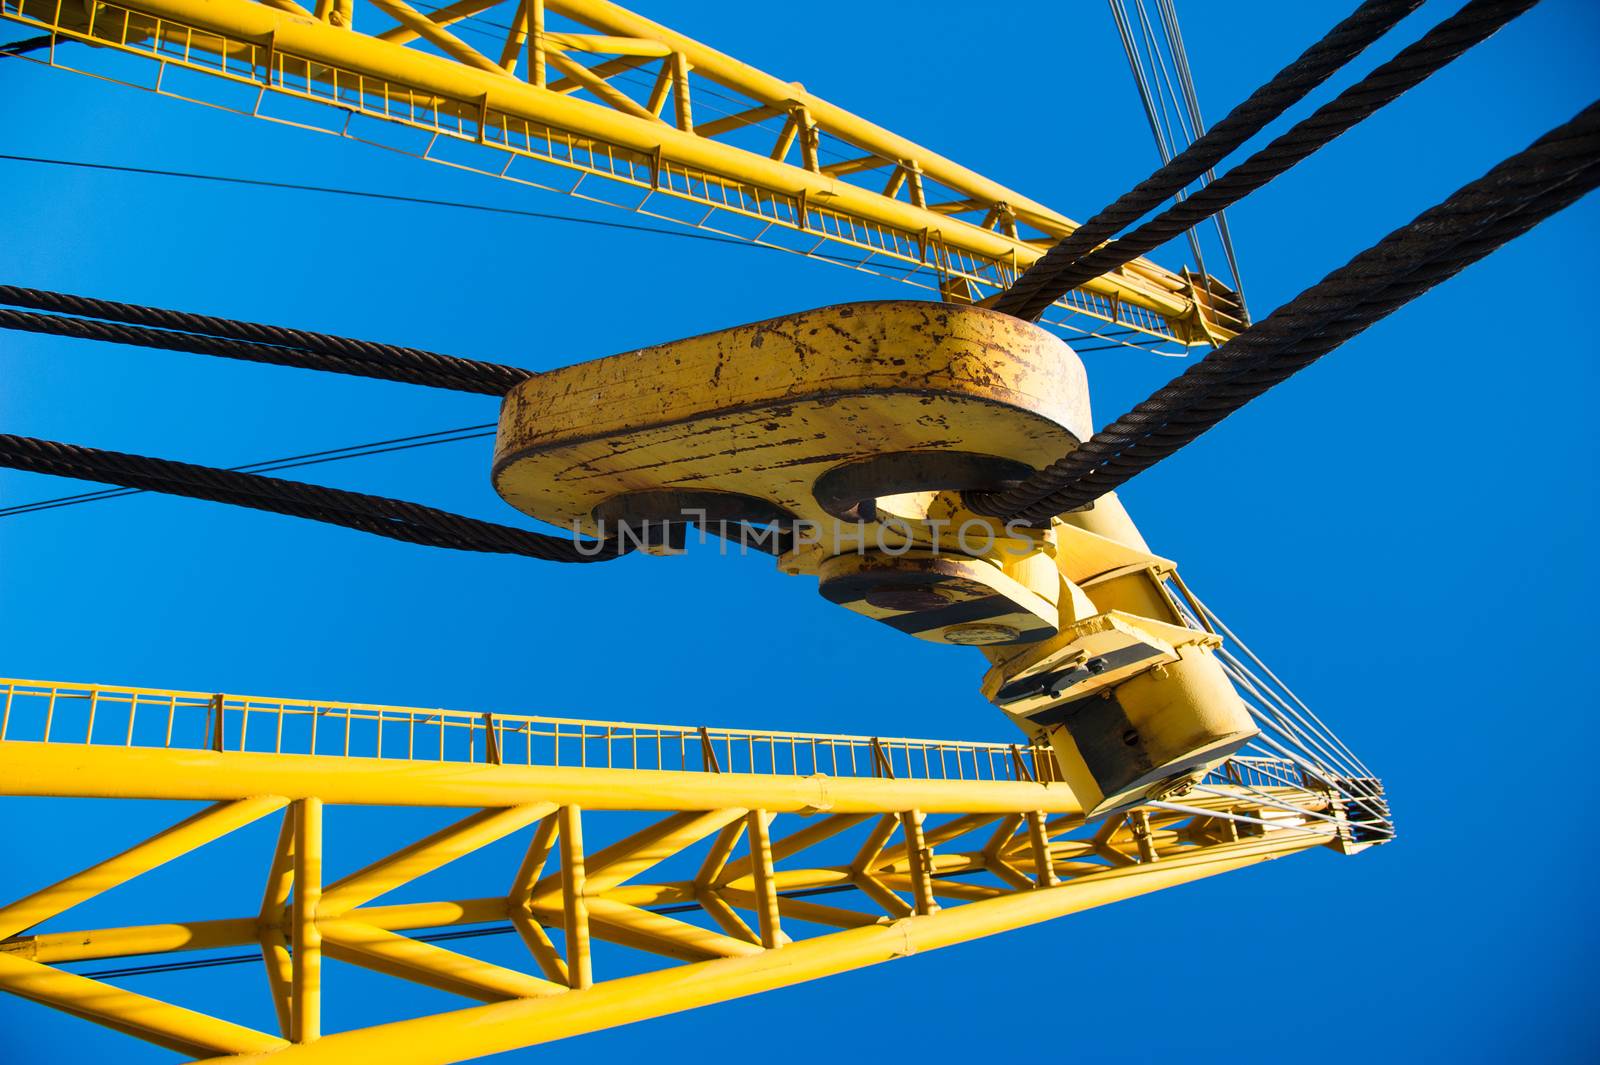 Loading in port. Floating port crane on blue sky background. Chains and hooks hoist with slings for loading in the port close-up